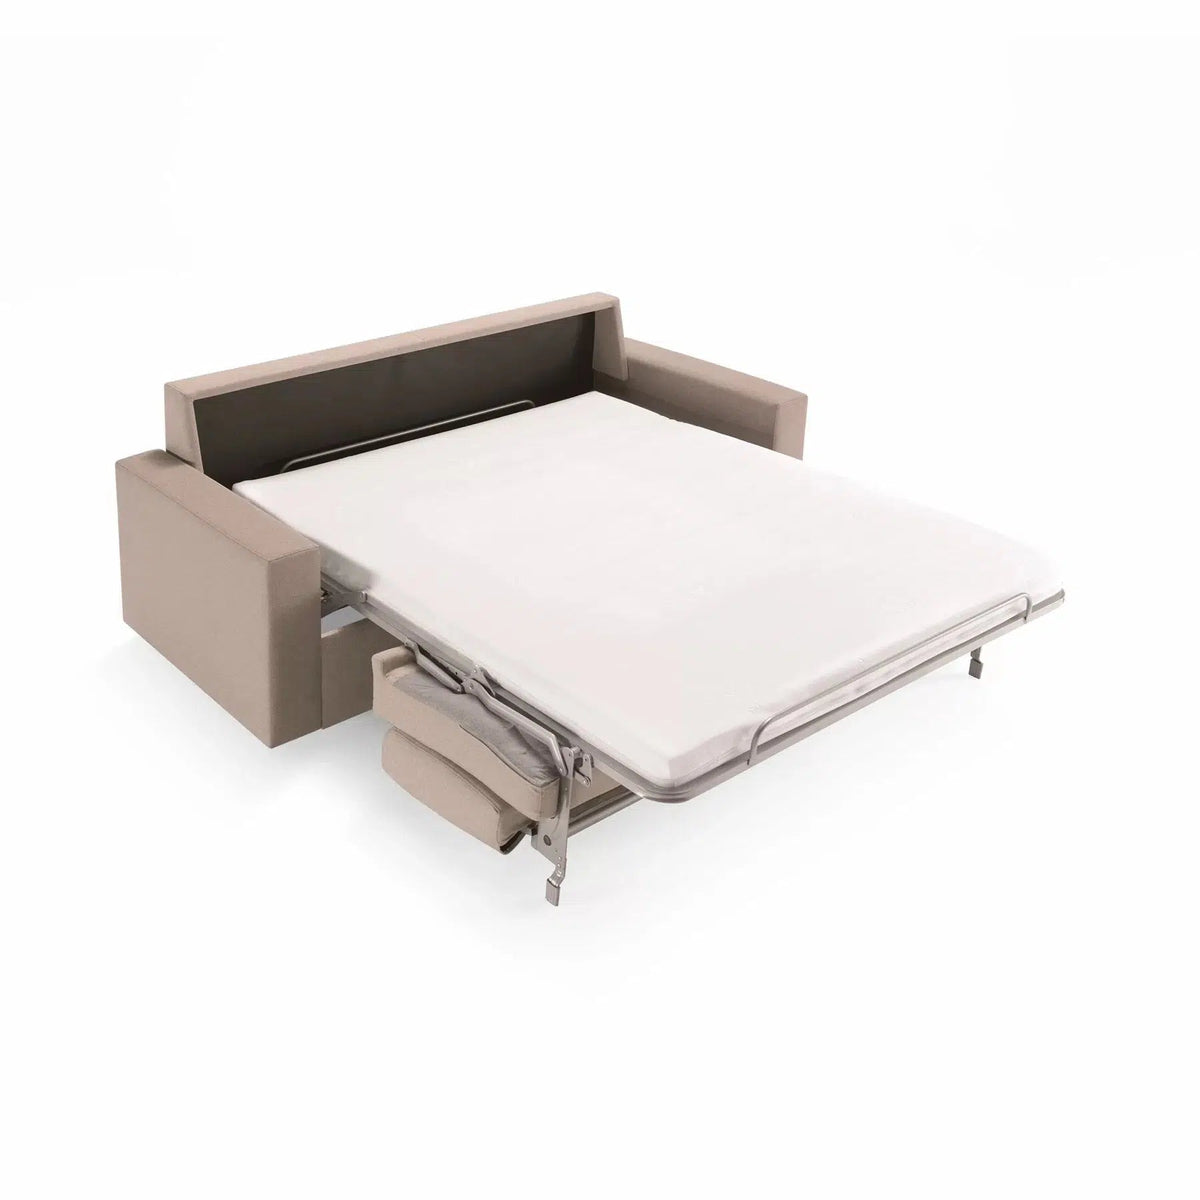 Marc 880 Sofa Bed-TM Leader-Contract Furniture Store